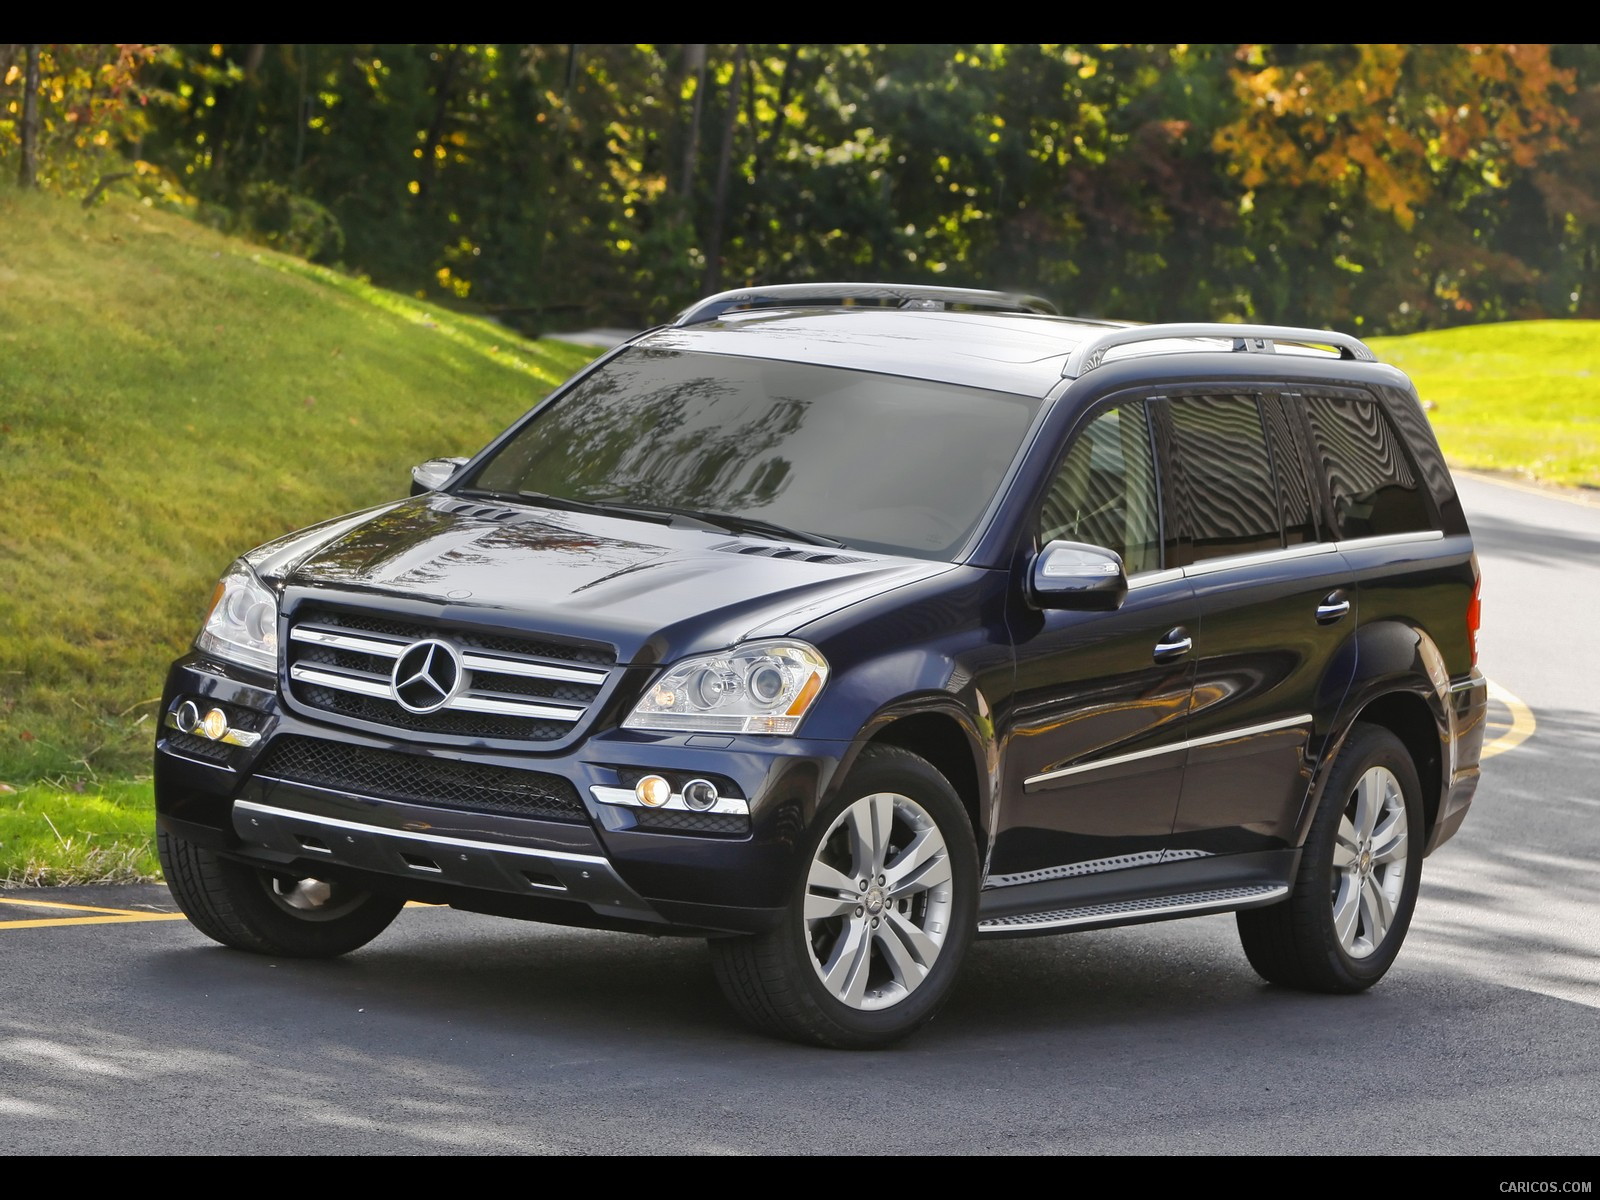 2010 Mercedes-Benz GL450 - Front, #77 of 112